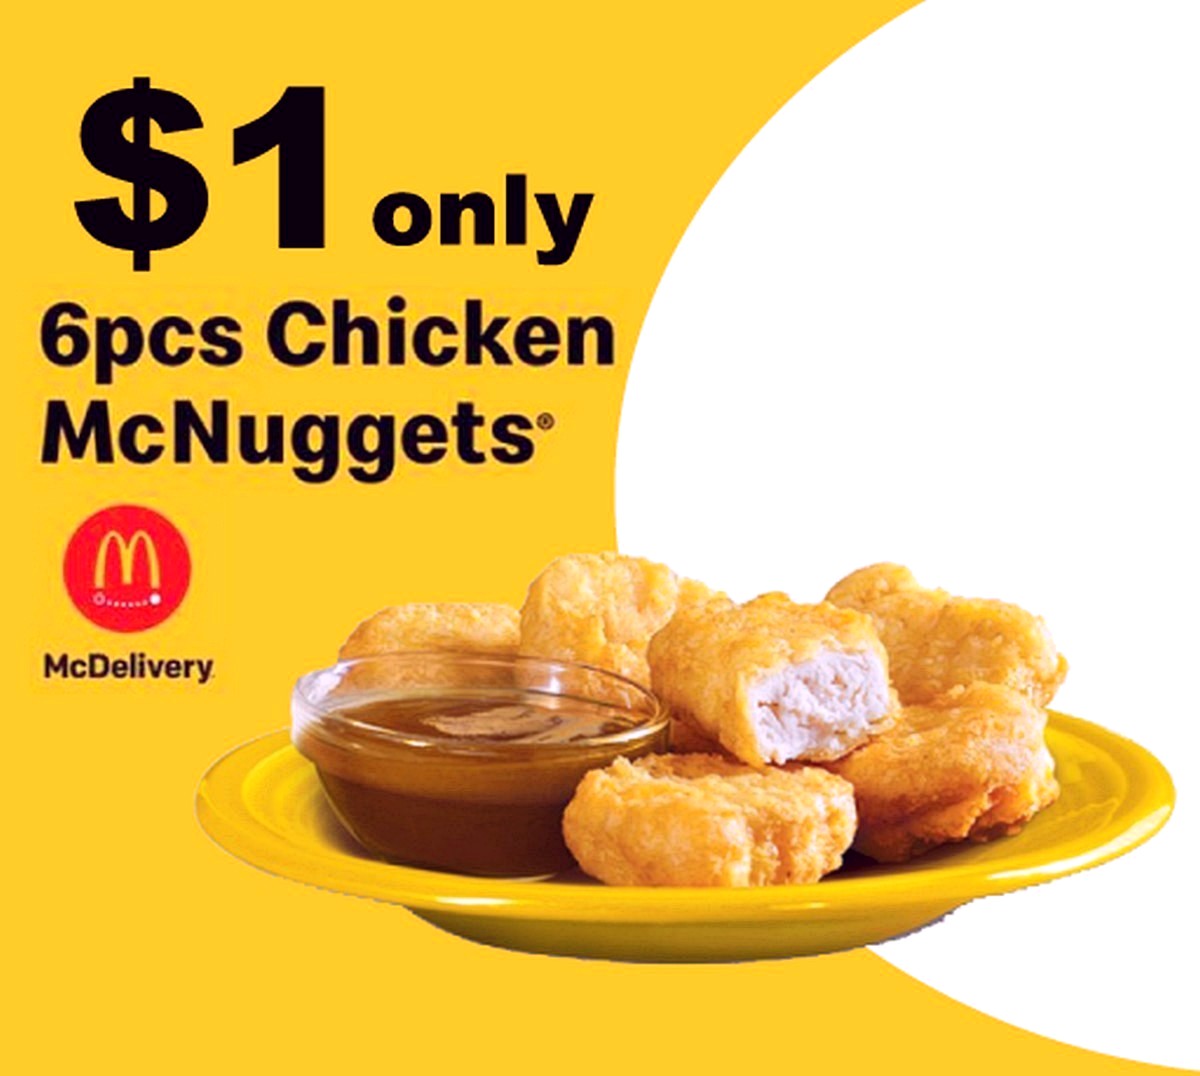 McDonalds-SGD-1-Dollar-McNuggets-6pcs-McDelivery Now till 15 Jun 2021: McDonald's 6pcs Chicken McNuggets for $1 only! FREE Fries & Hashbrown Promo Codes to Redeem!